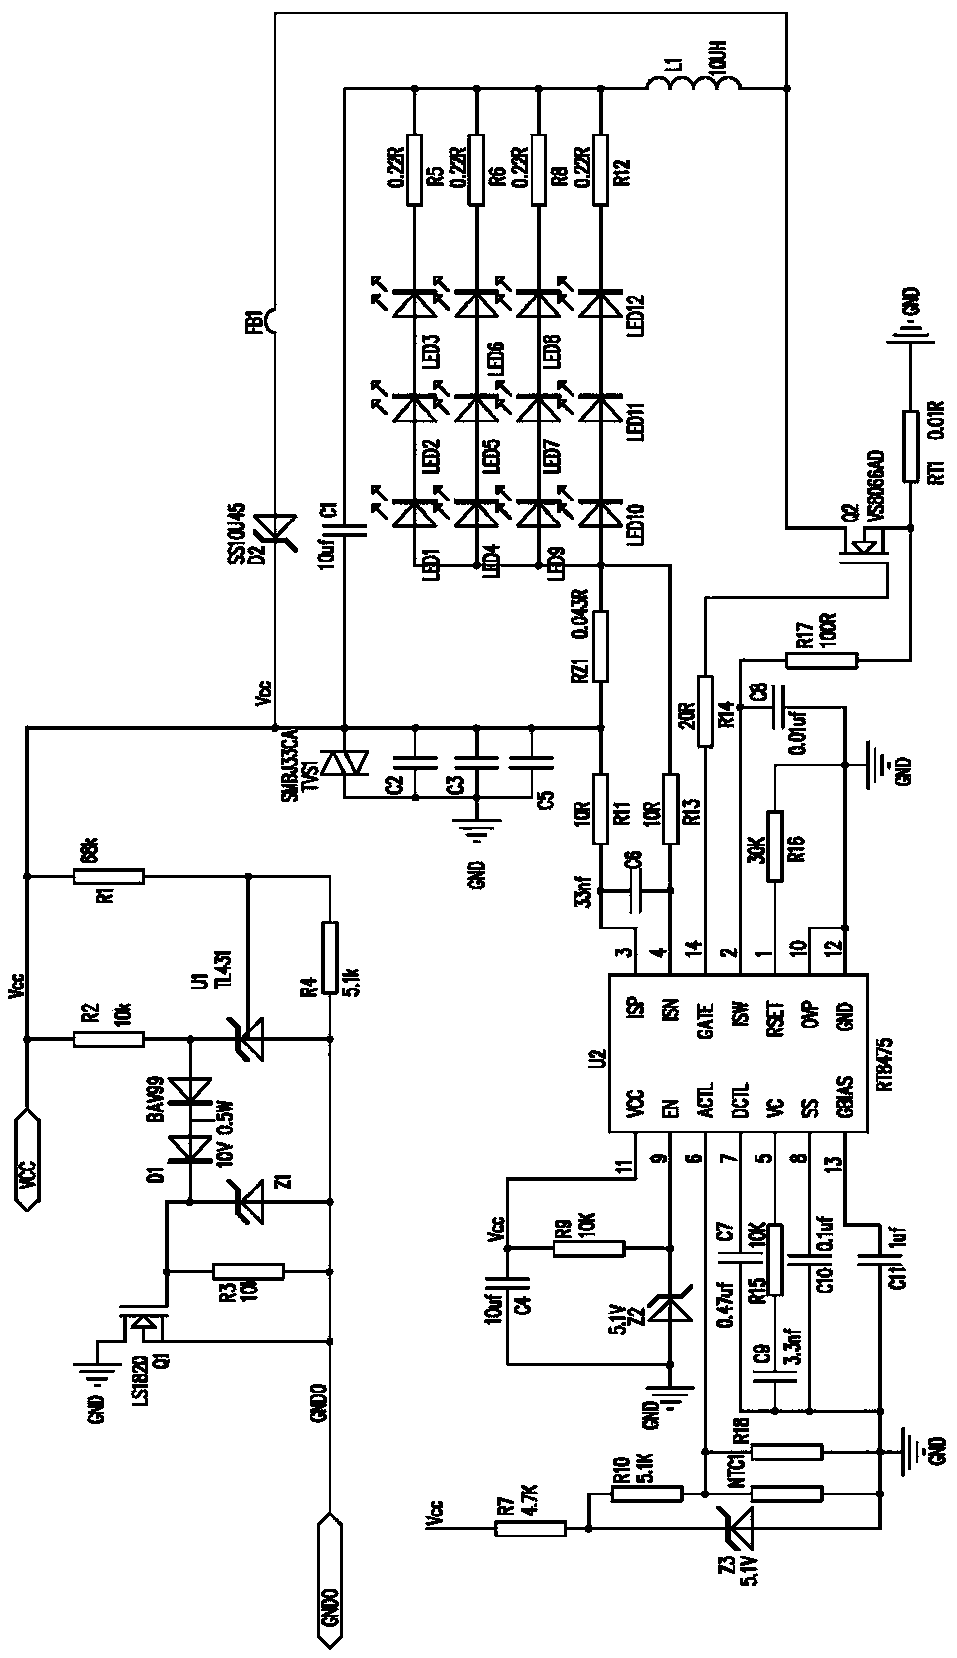 A protection circuit for led lamps